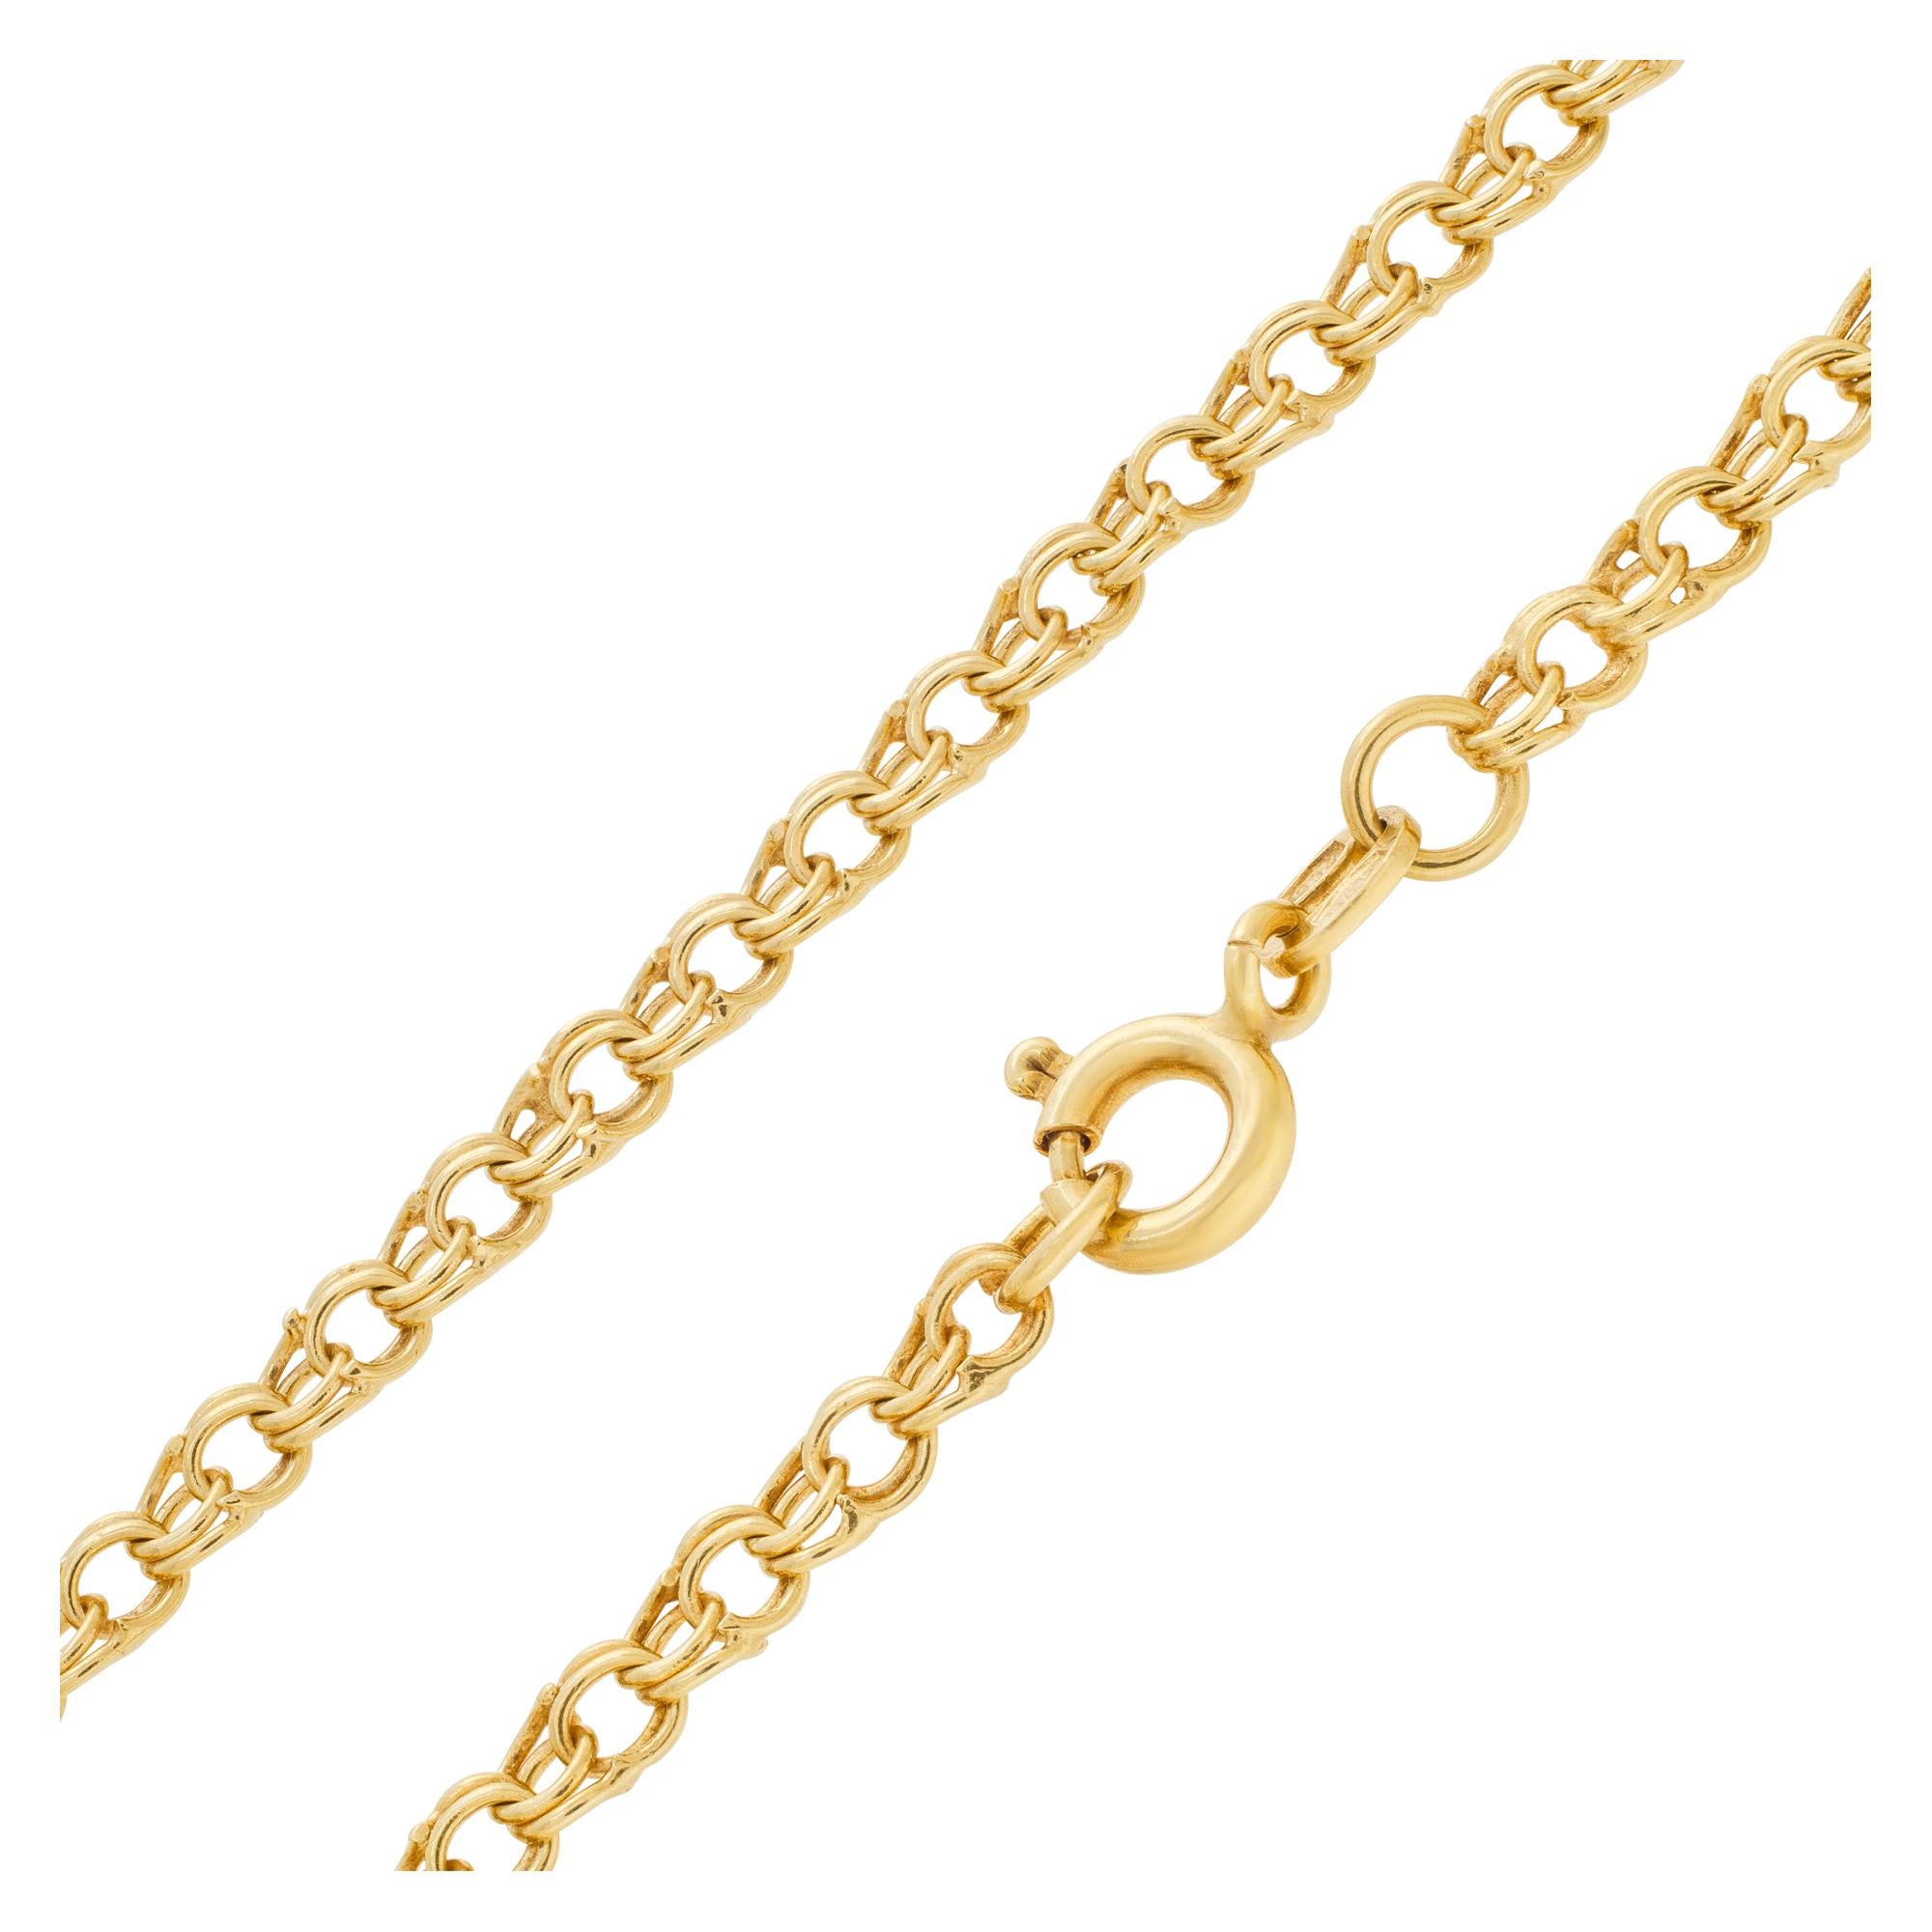 18k yellow gold double ring chain. Length 35.5 inches. Width 3.1mm
